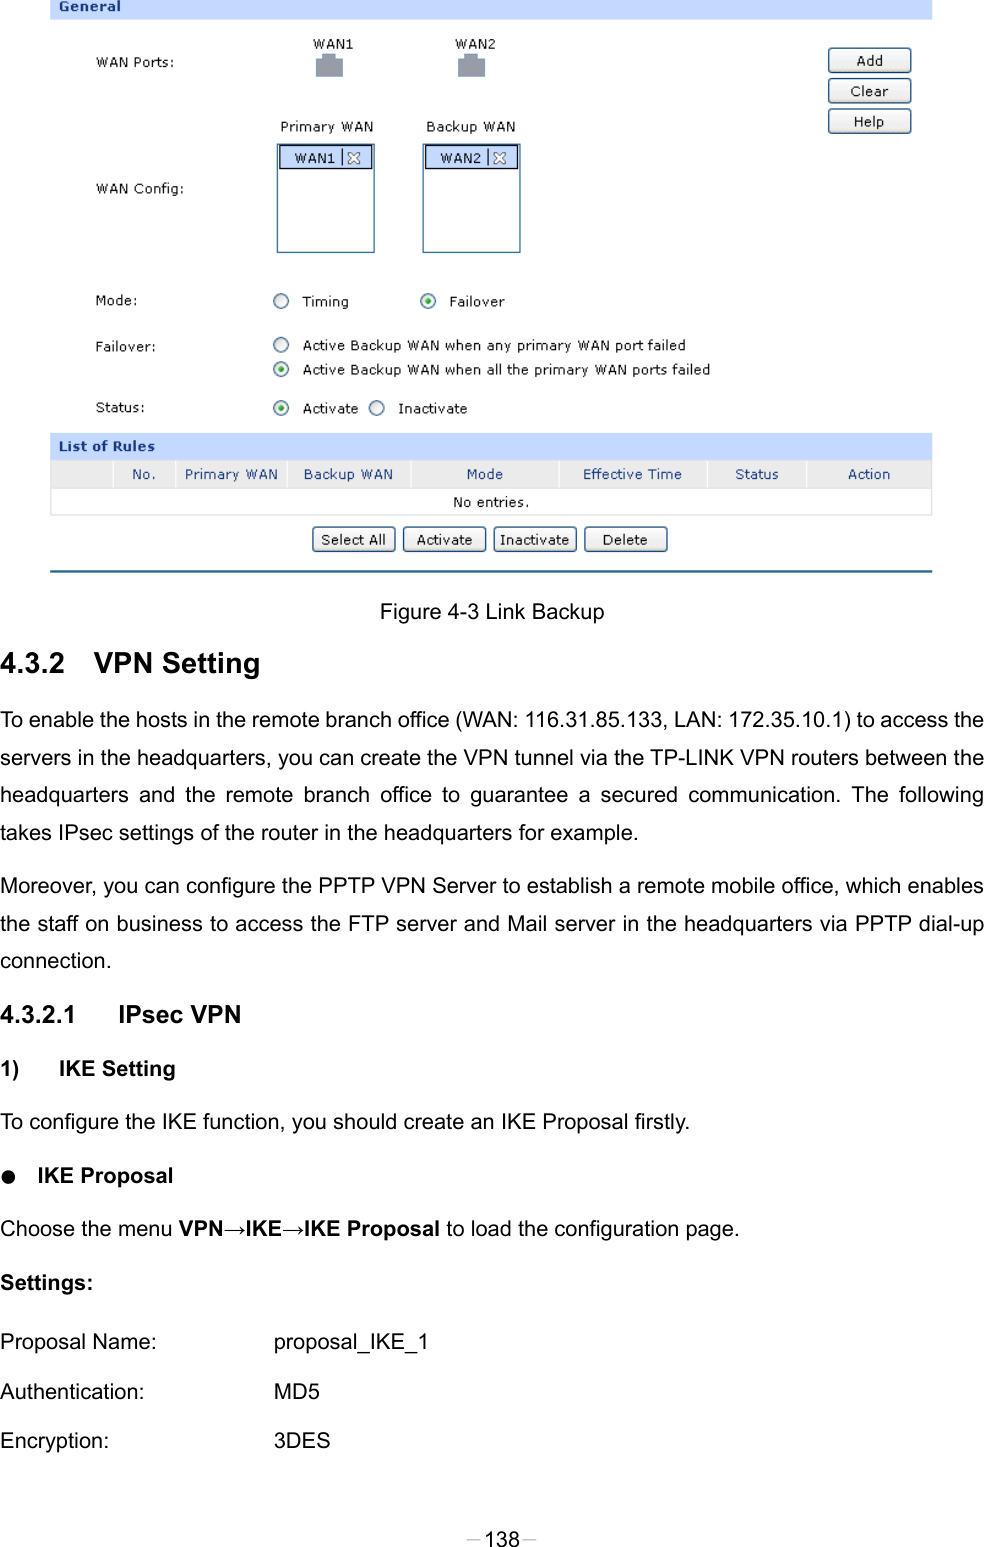   Figure 4-3 Link Backup 4.3.2 VPN Setting To enable the hosts in the remote branch office (WAN: 116.31.85.133, LAN: 172.35.10.1) to access the servers in the headquarters, you can create the VPN tunnel via the TP-LINK VPN routers between the headquarters and the remote branch office to guarantee a secured communication. The following takes IPsec settings of the router in the headquarters for example. Moreover, you can configure the PPTP VPN Server to establish a remote mobile office, which enables the staff on business to access the FTP server and Mail server in the headquarters via PPTP dial-up connection.   4.3.2.1 IPsec VPN   1) IKE Setting To configure the IKE function, you should create an IKE Proposal firstly.   ● IKE Proposal Choose the menu VPN→IKE→IKE Proposal to load the configuration page.   Settings: Proposal Name: proposal_IKE_1 Authentication: MD5 Encryption: 3DES -138- 